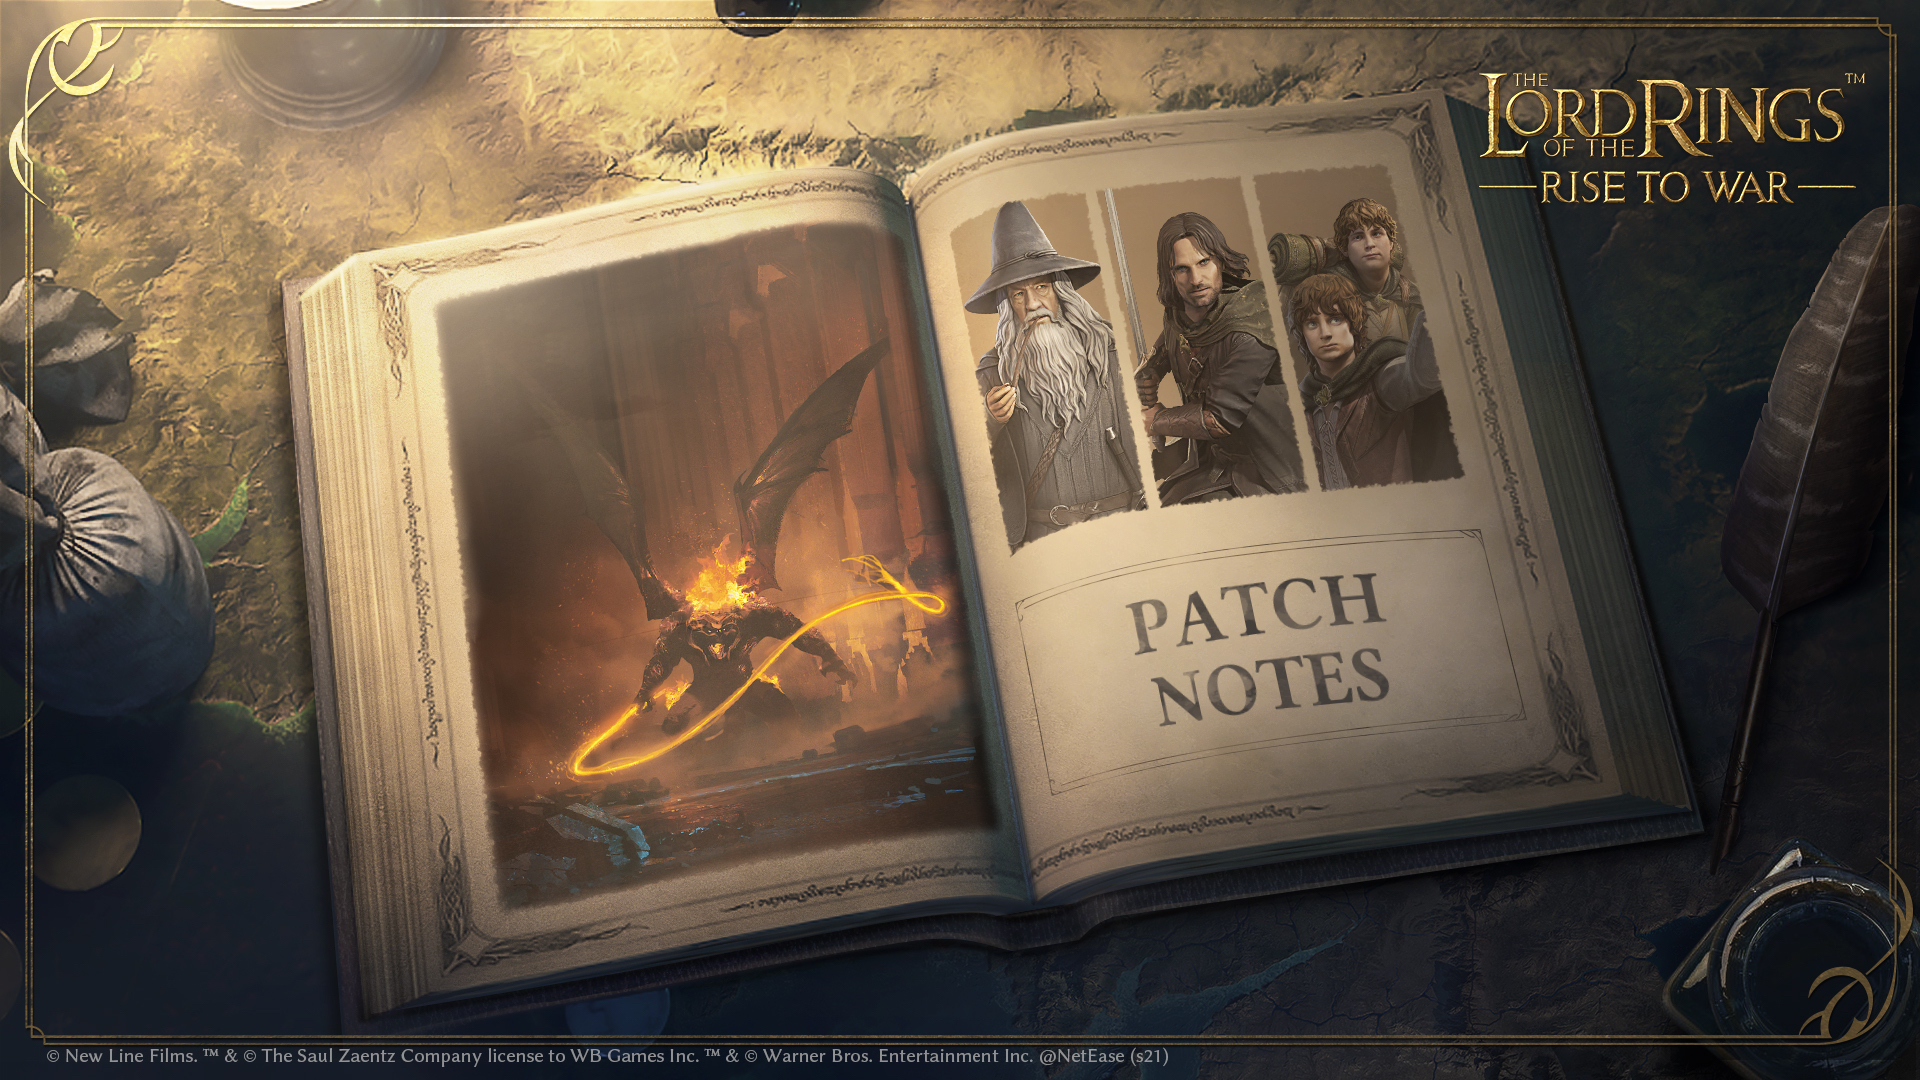 The Lord of the Rings Rise to War: Latest Patch Notes